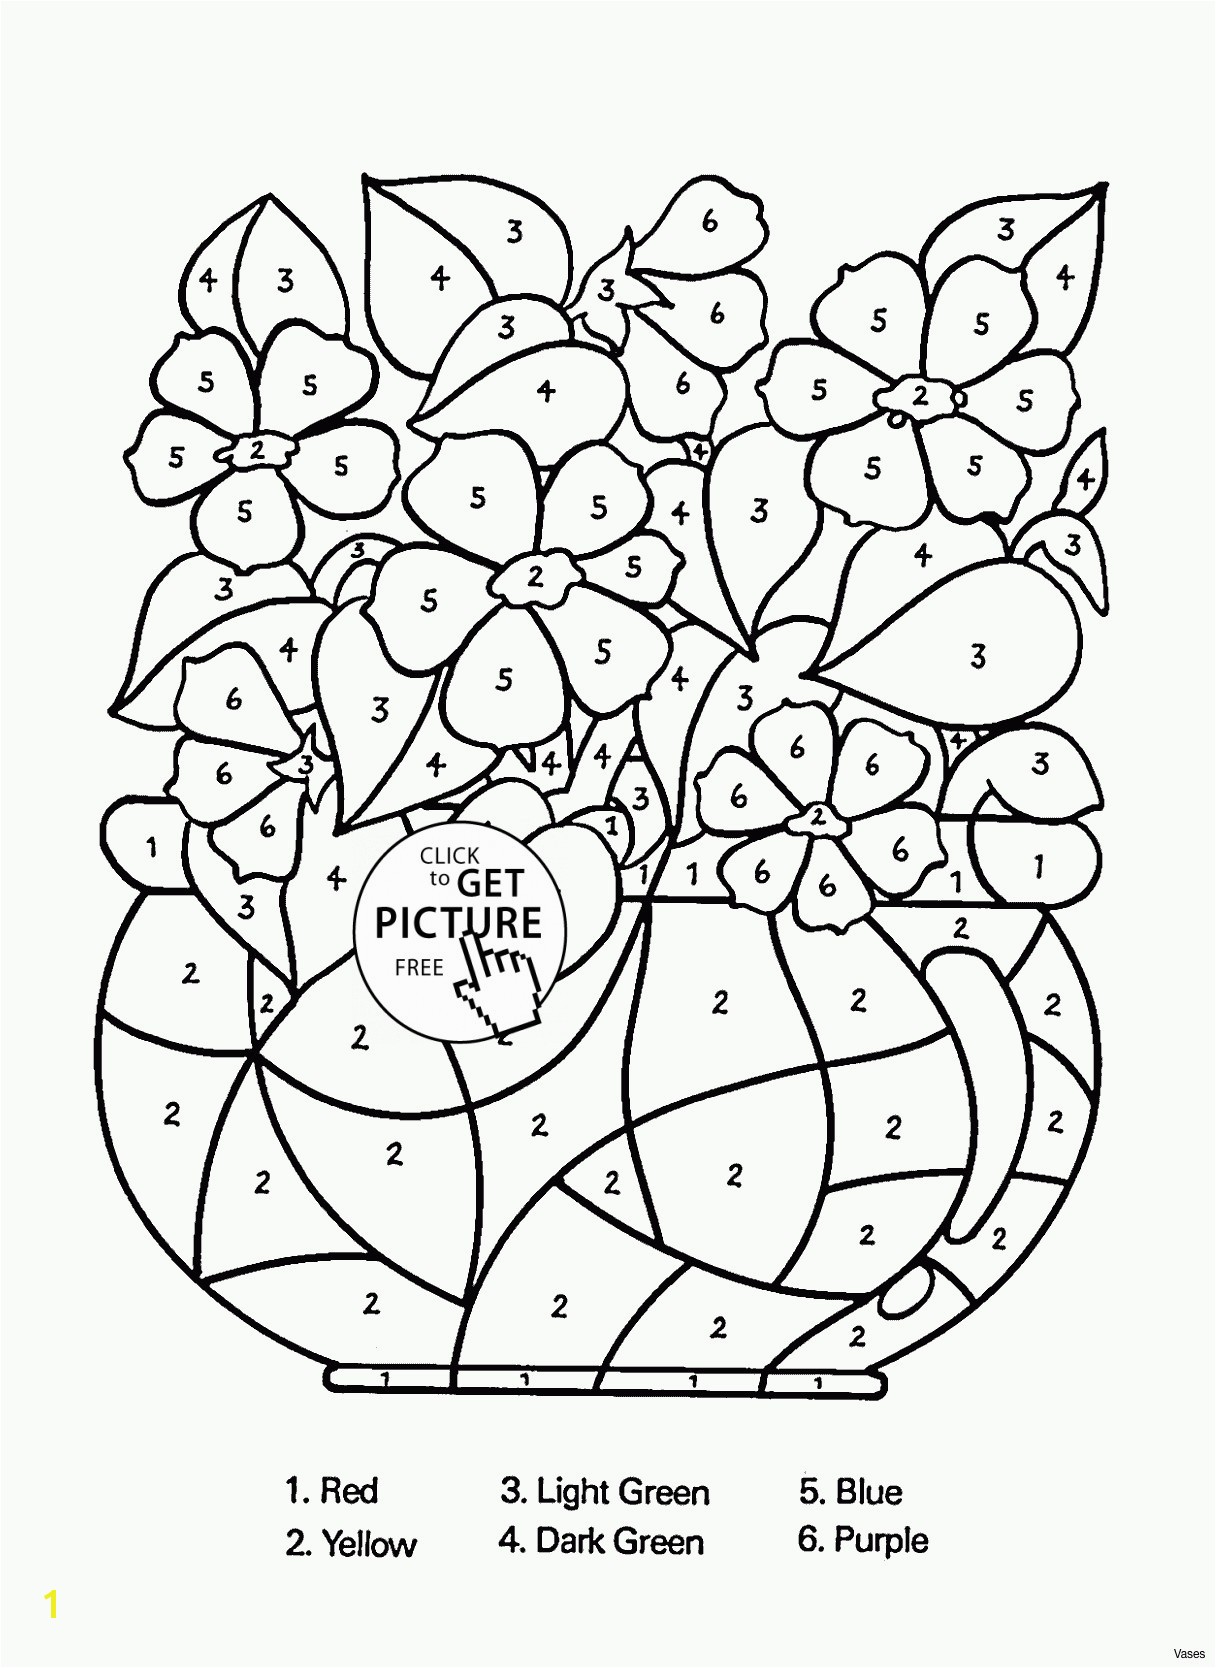 Swearing Coloring Pages Printable Swear Word Coloring Pages Printable Free Awesome Cool Vases Flower